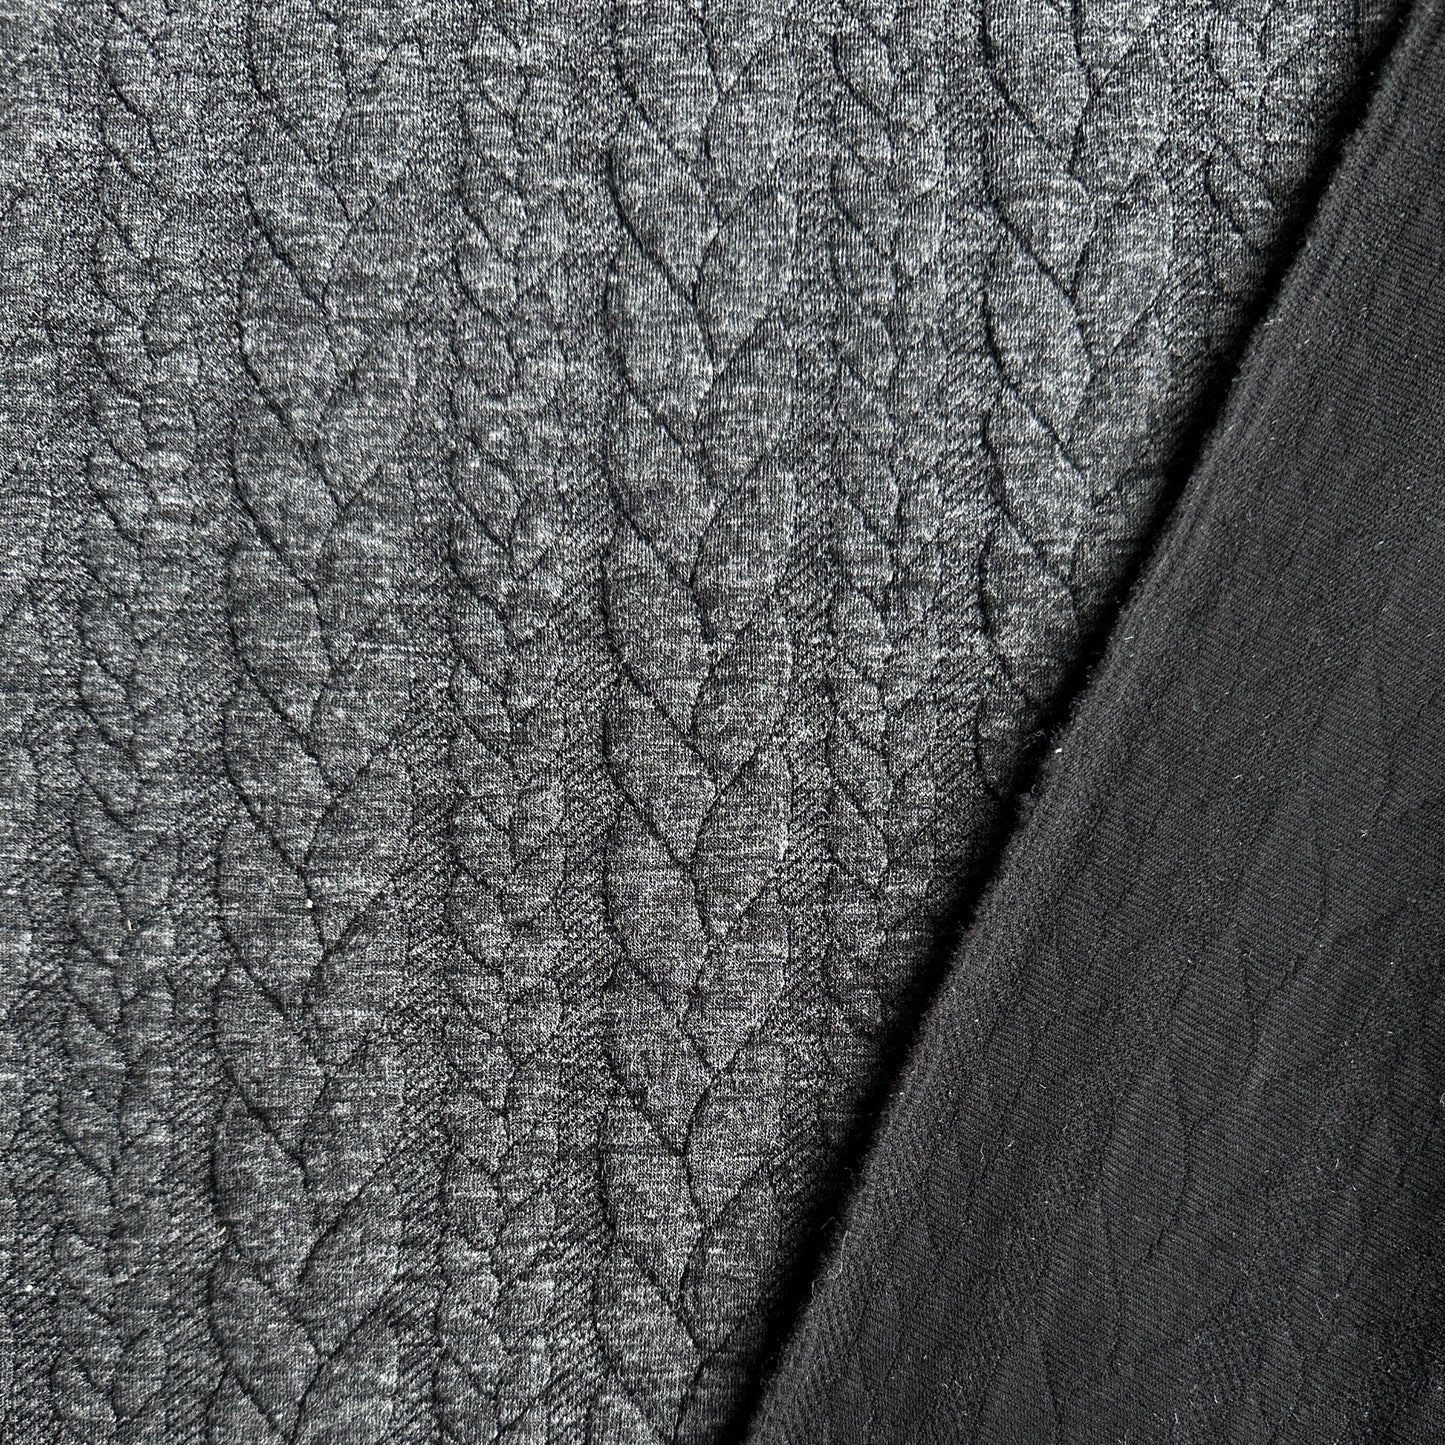 Cable Knit Jacquard Jersey Fabric in Charcoal Grey